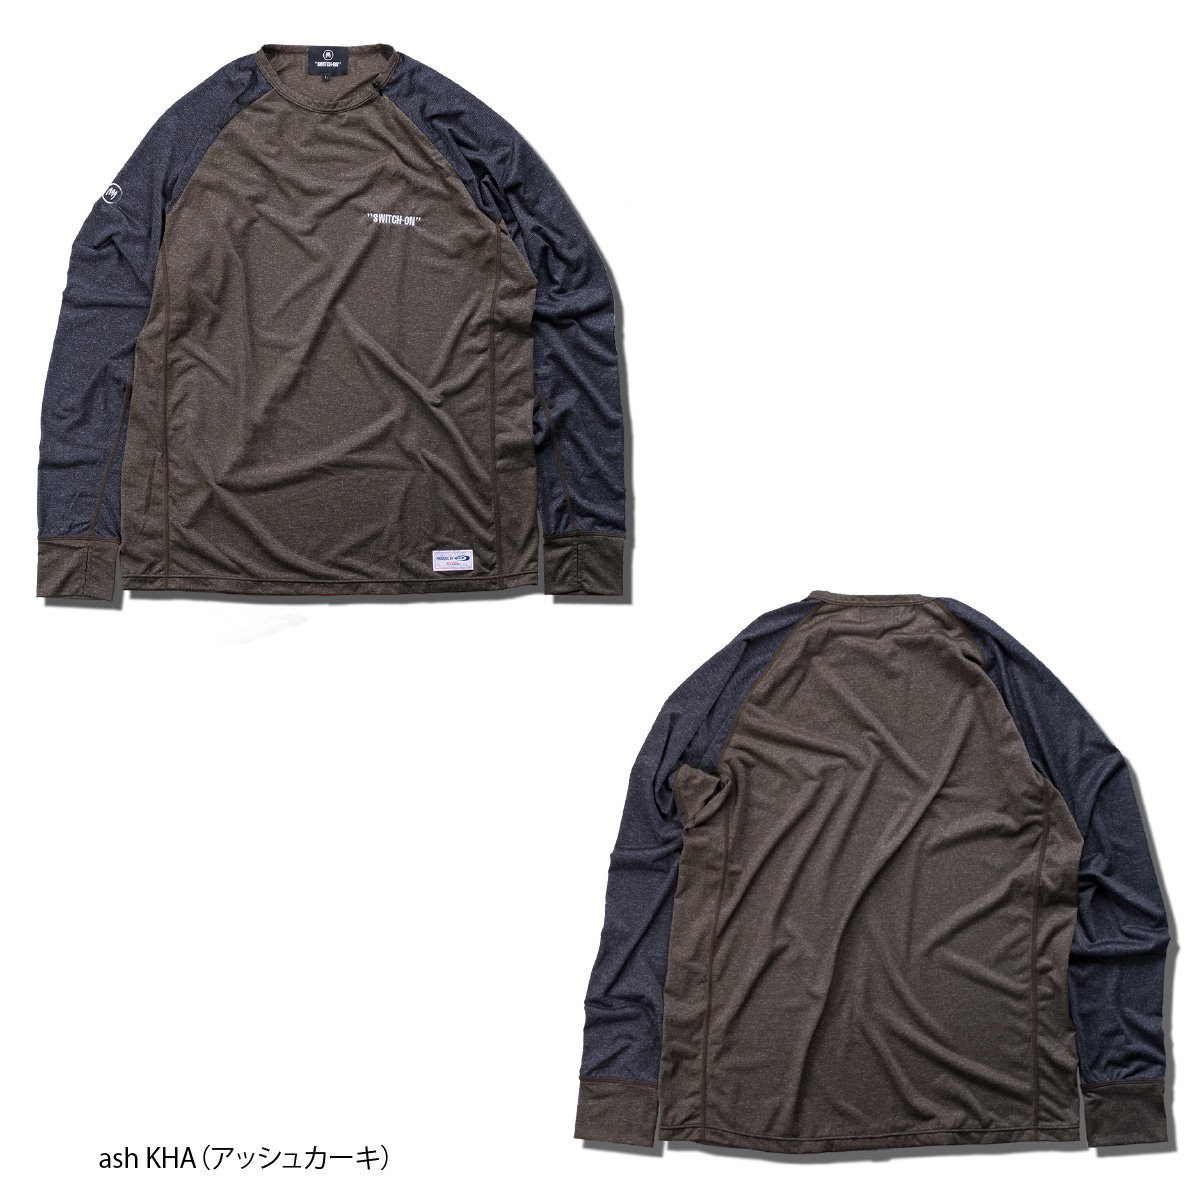 3A dry L/S T-Shirt<img class='new_mark_img2' src='https://img.shop-pro.jp/img/new/icons62.gif' style='border:none;display:inline;margin:0px;padding:0px;width:auto;' />